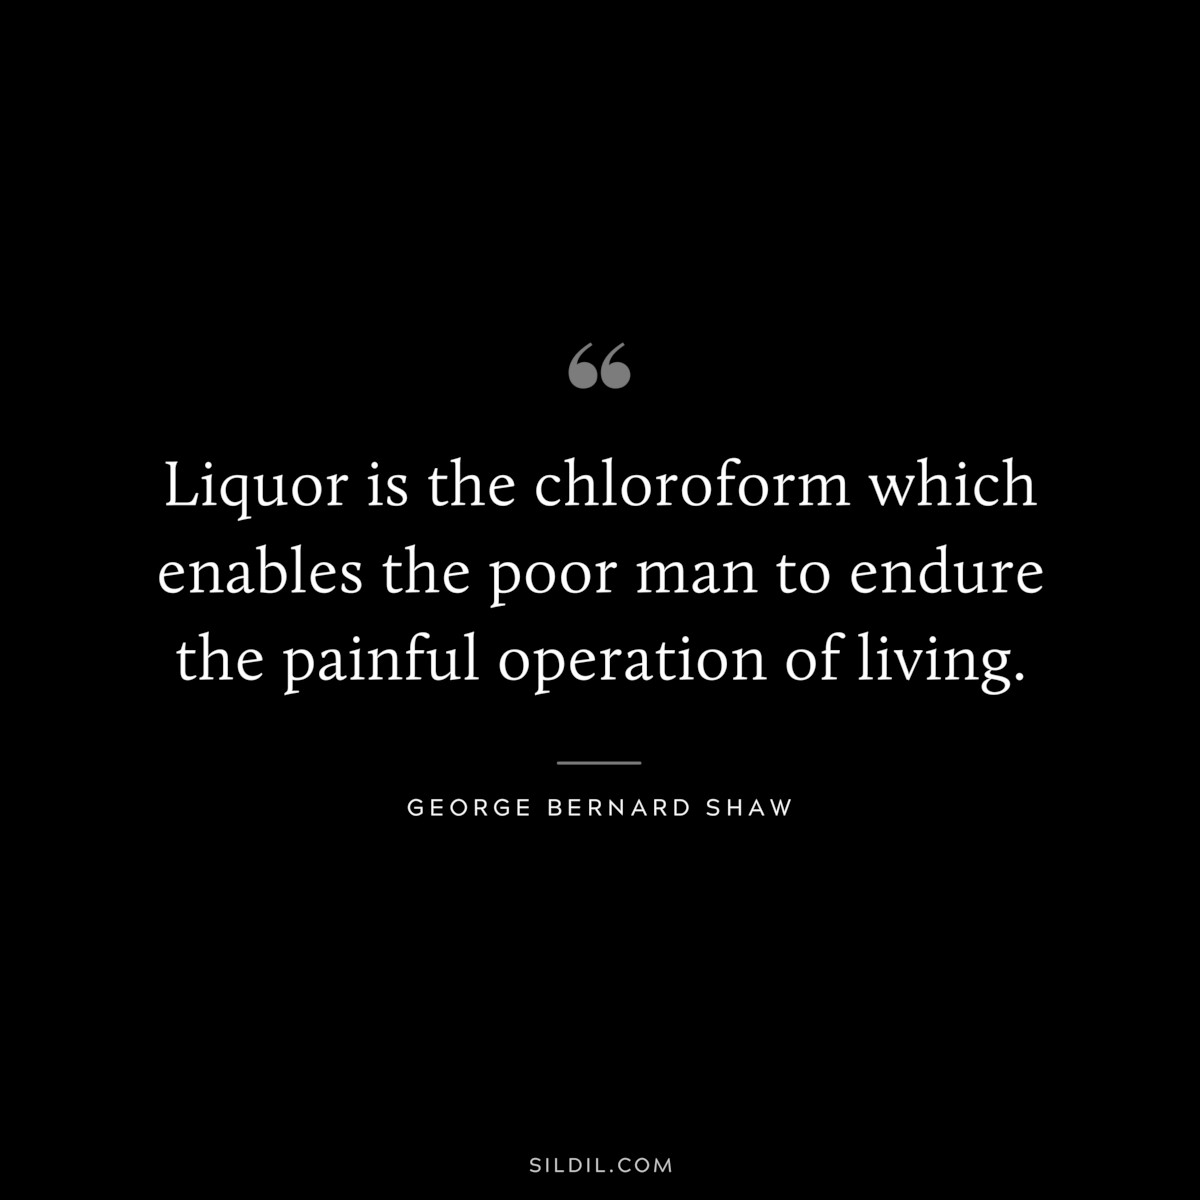 Liquor is the chloroform which enables the poor man to endure the painful operation of living. ― George Bernard Shaw